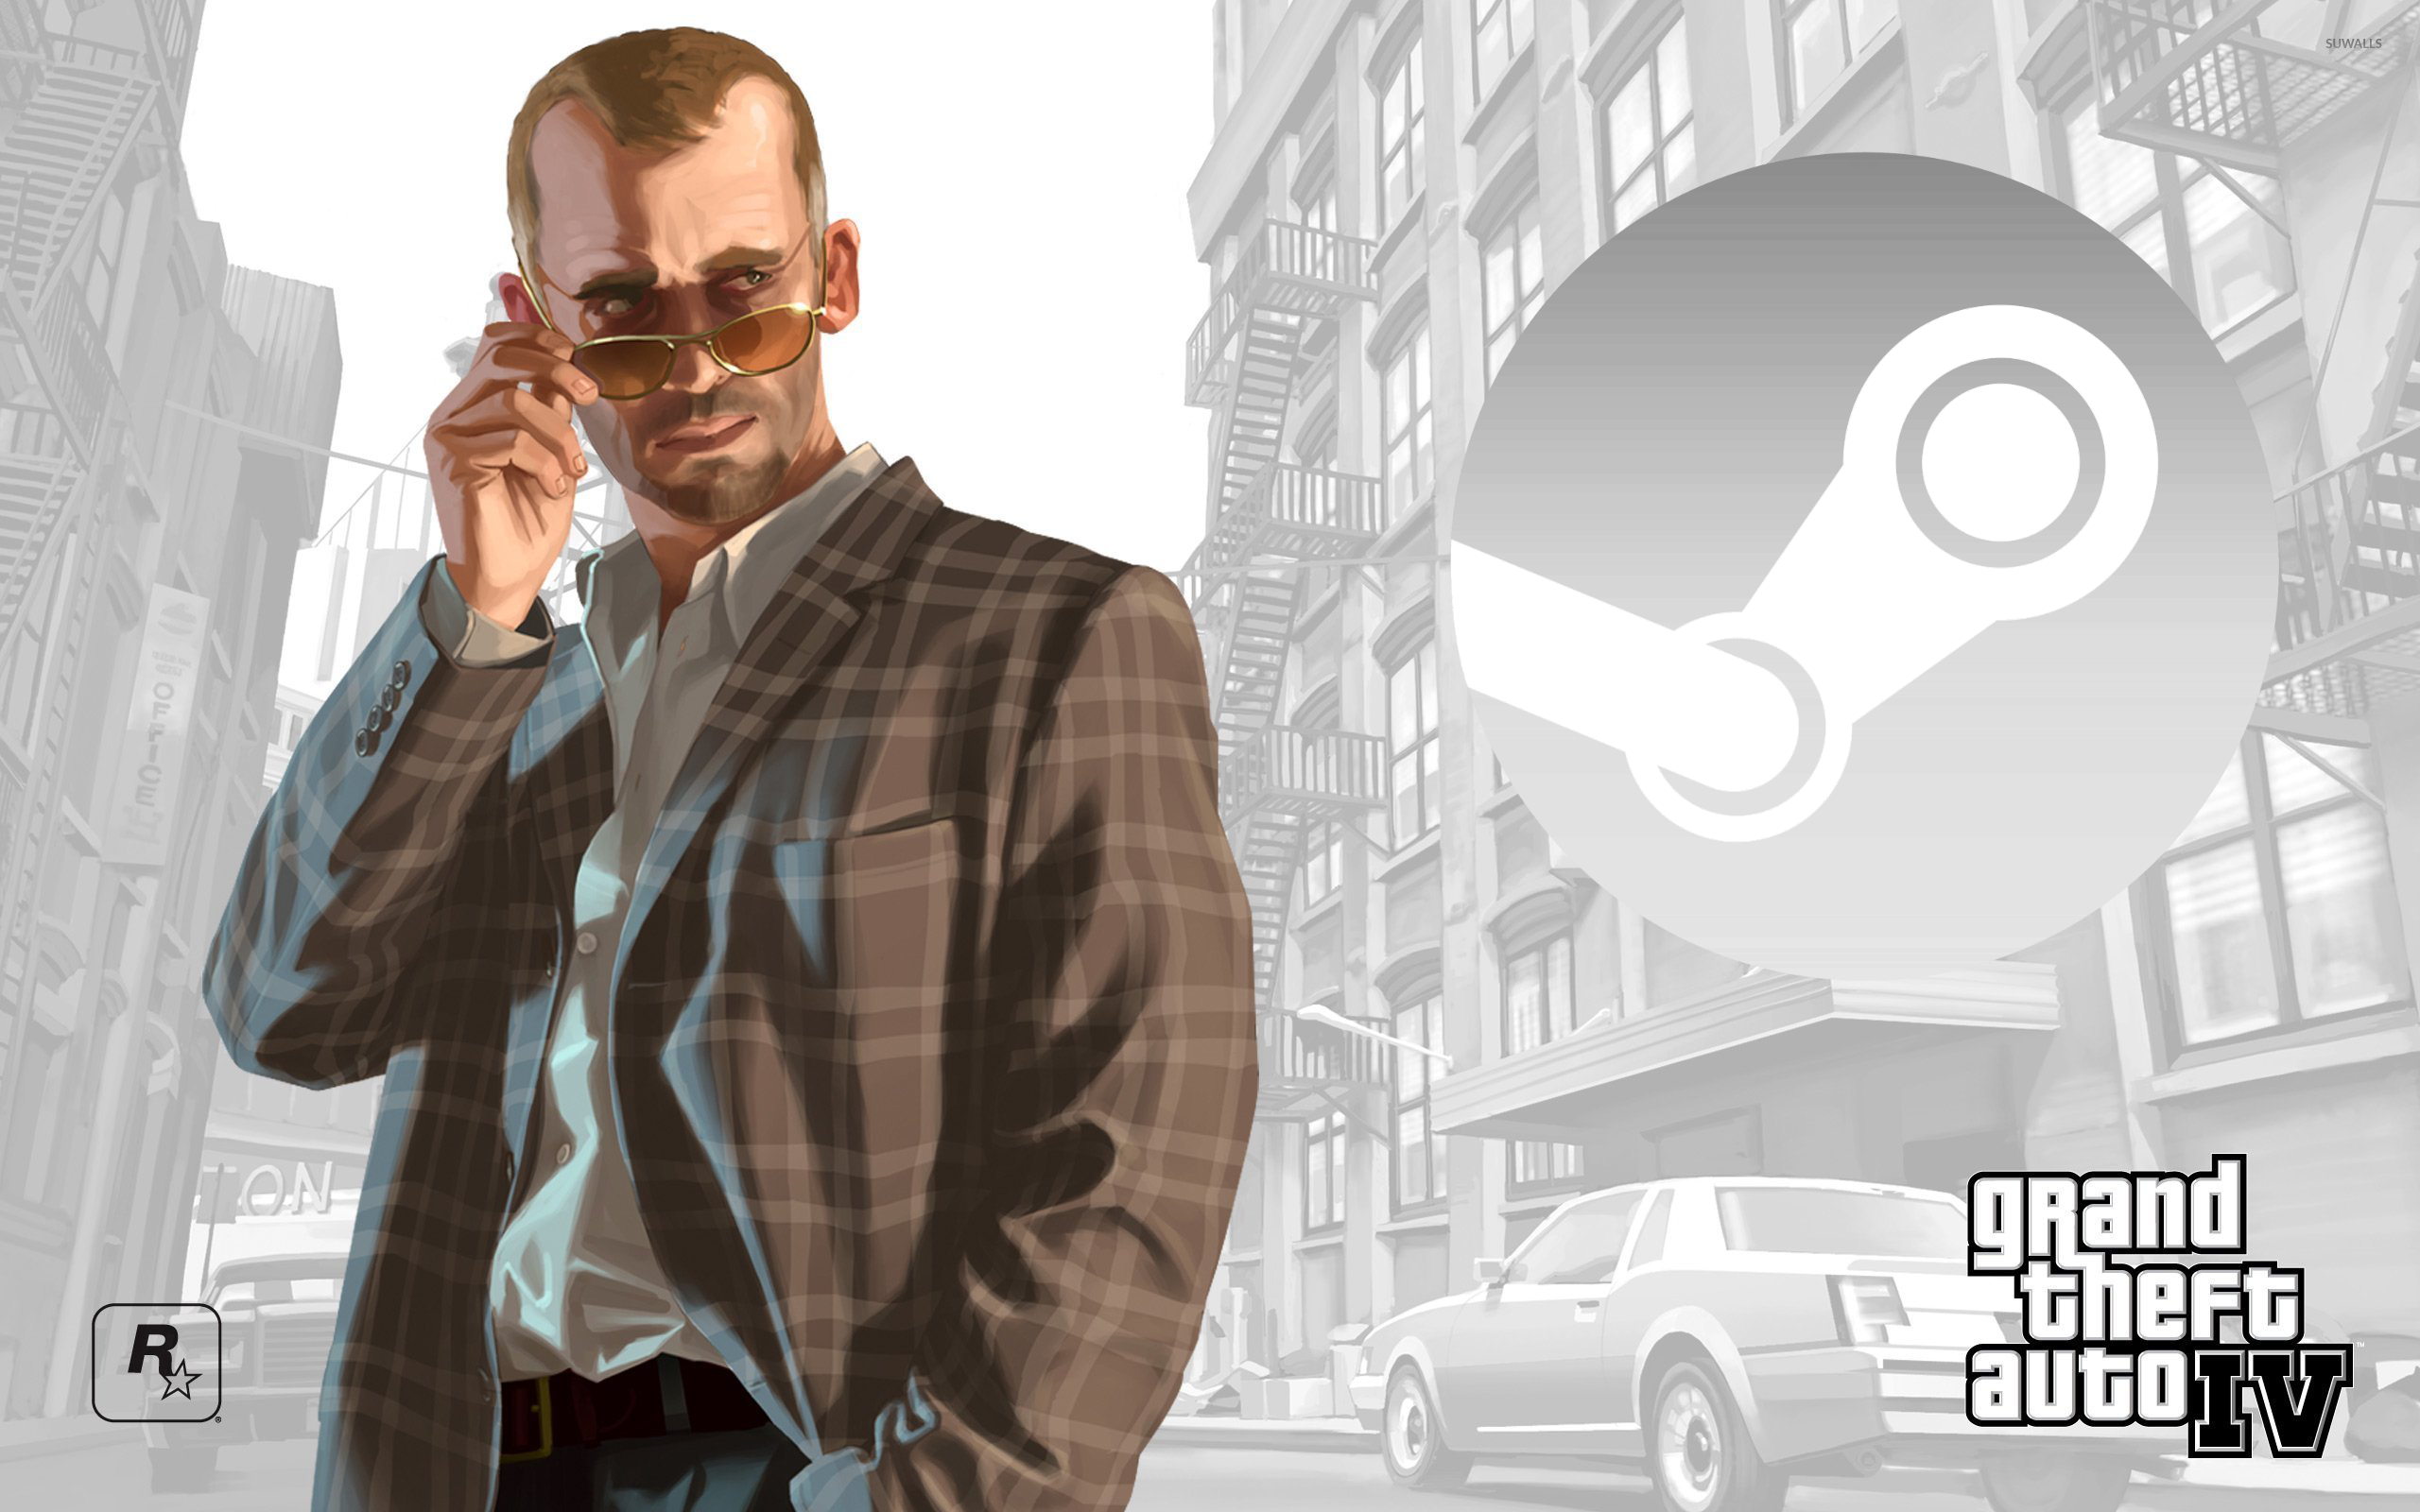 Grand Theft Auto IV returning to Steam in March as Complete